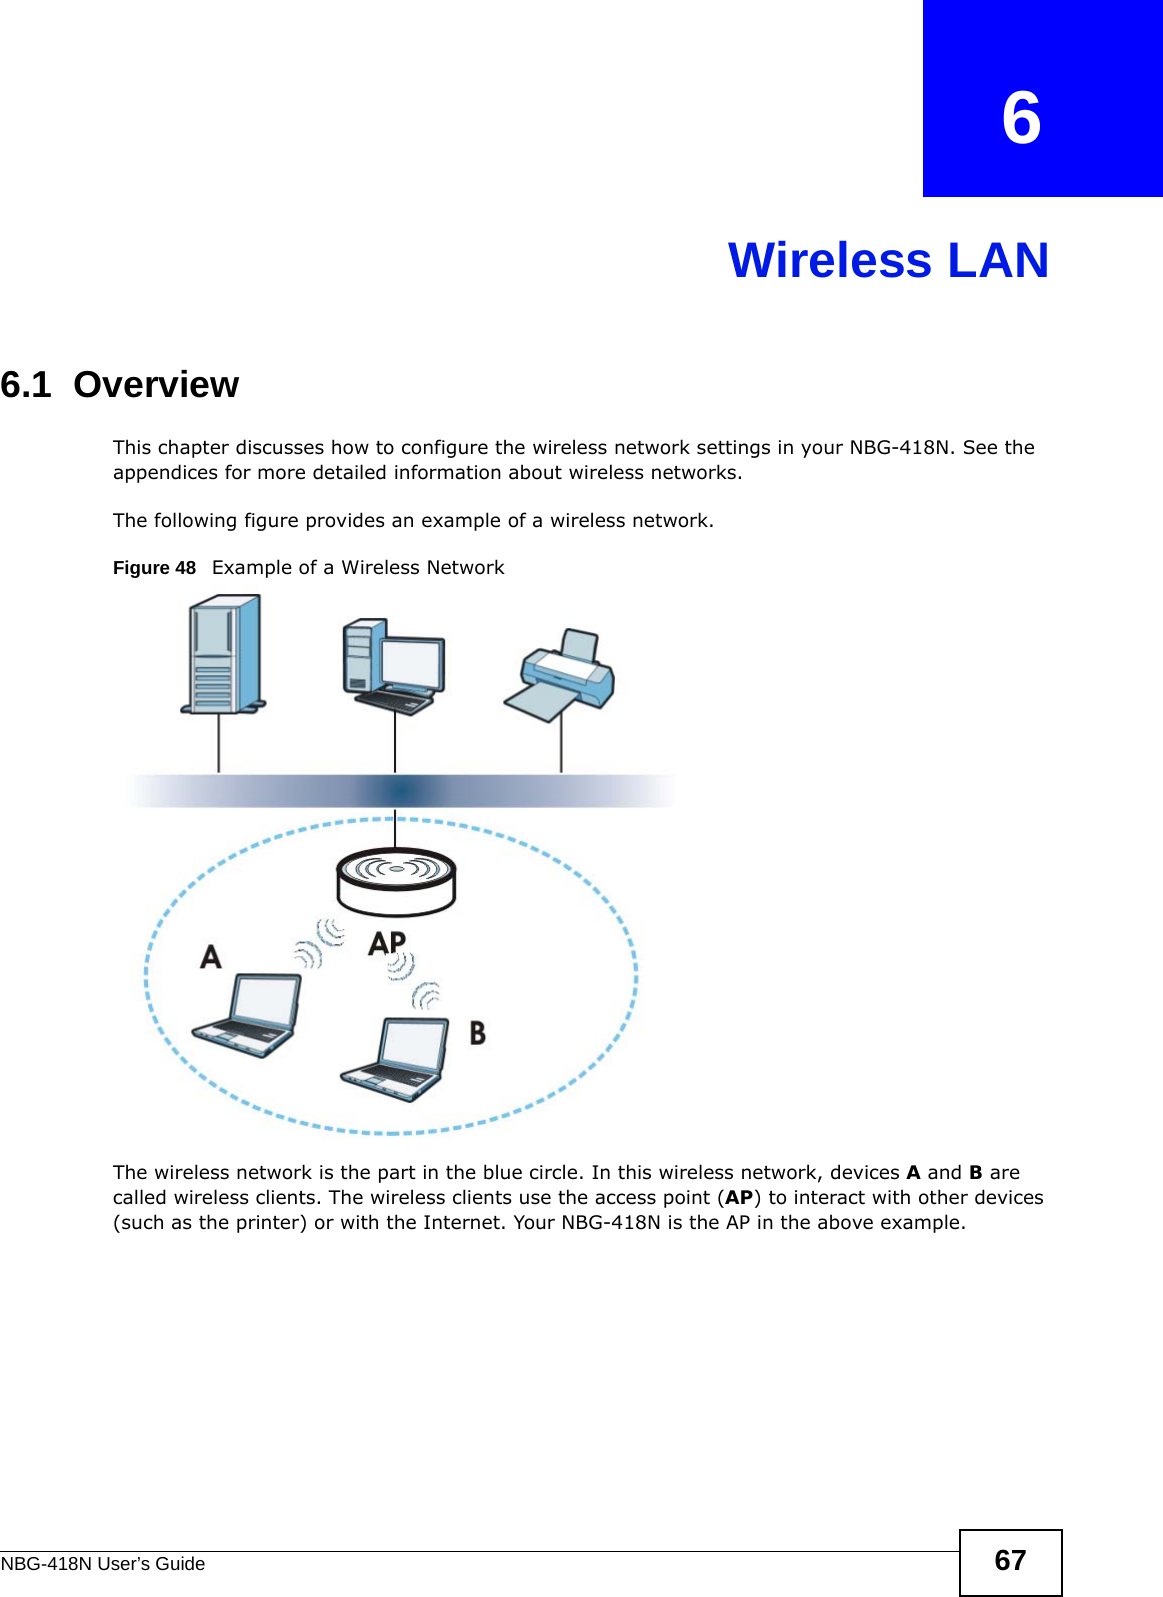 NBG-418N User’s Guide 67CHAPTER   6Wireless LAN6.1  OverviewThis chapter discusses how to configure the wireless network settings in your NBG-418N. See the appendices for more detailed information about wireless networks.The following figure provides an example of a wireless network.Figure 48   Example of a Wireless NetworkThe wireless network is the part in the blue circle. In this wireless network, devices A and B are called wireless clients. The wireless clients use the access point (AP) to interact with other devices (such as the printer) or with the Internet. Your NBG-418N is the AP in the above example.